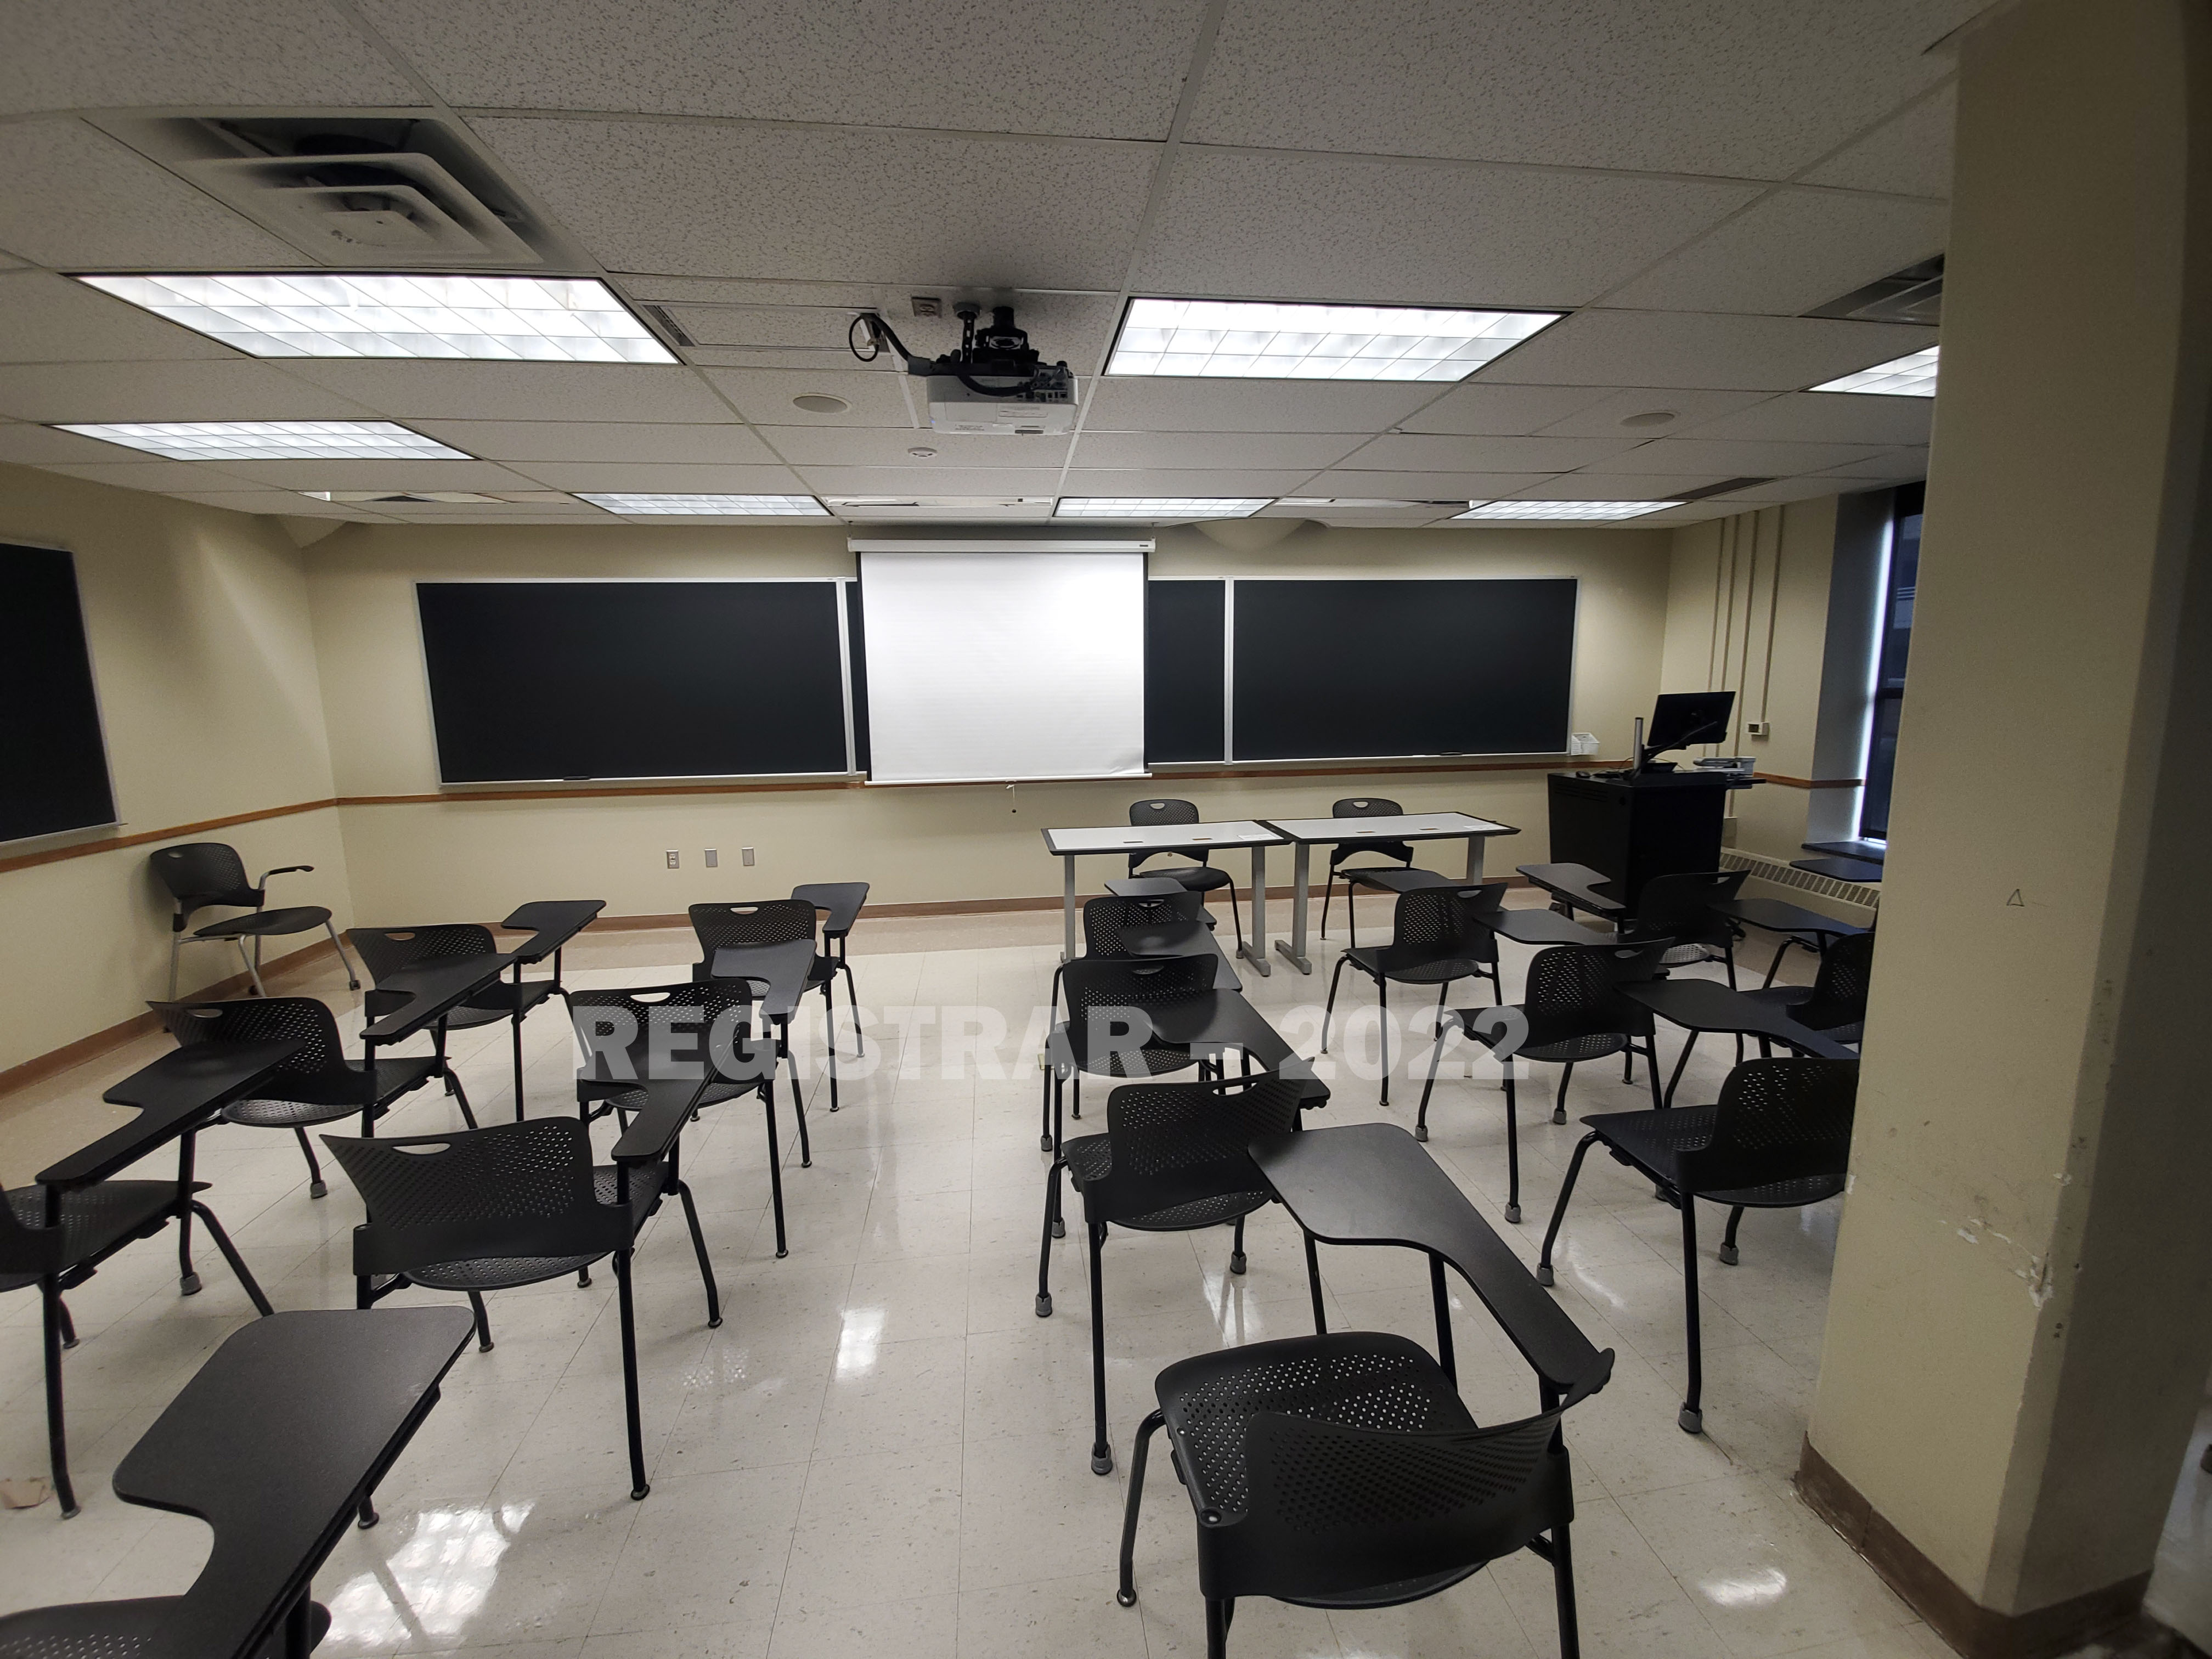 Enarson Classroom Building room 222 ultra wide angle view from the back of the room with projector screen down